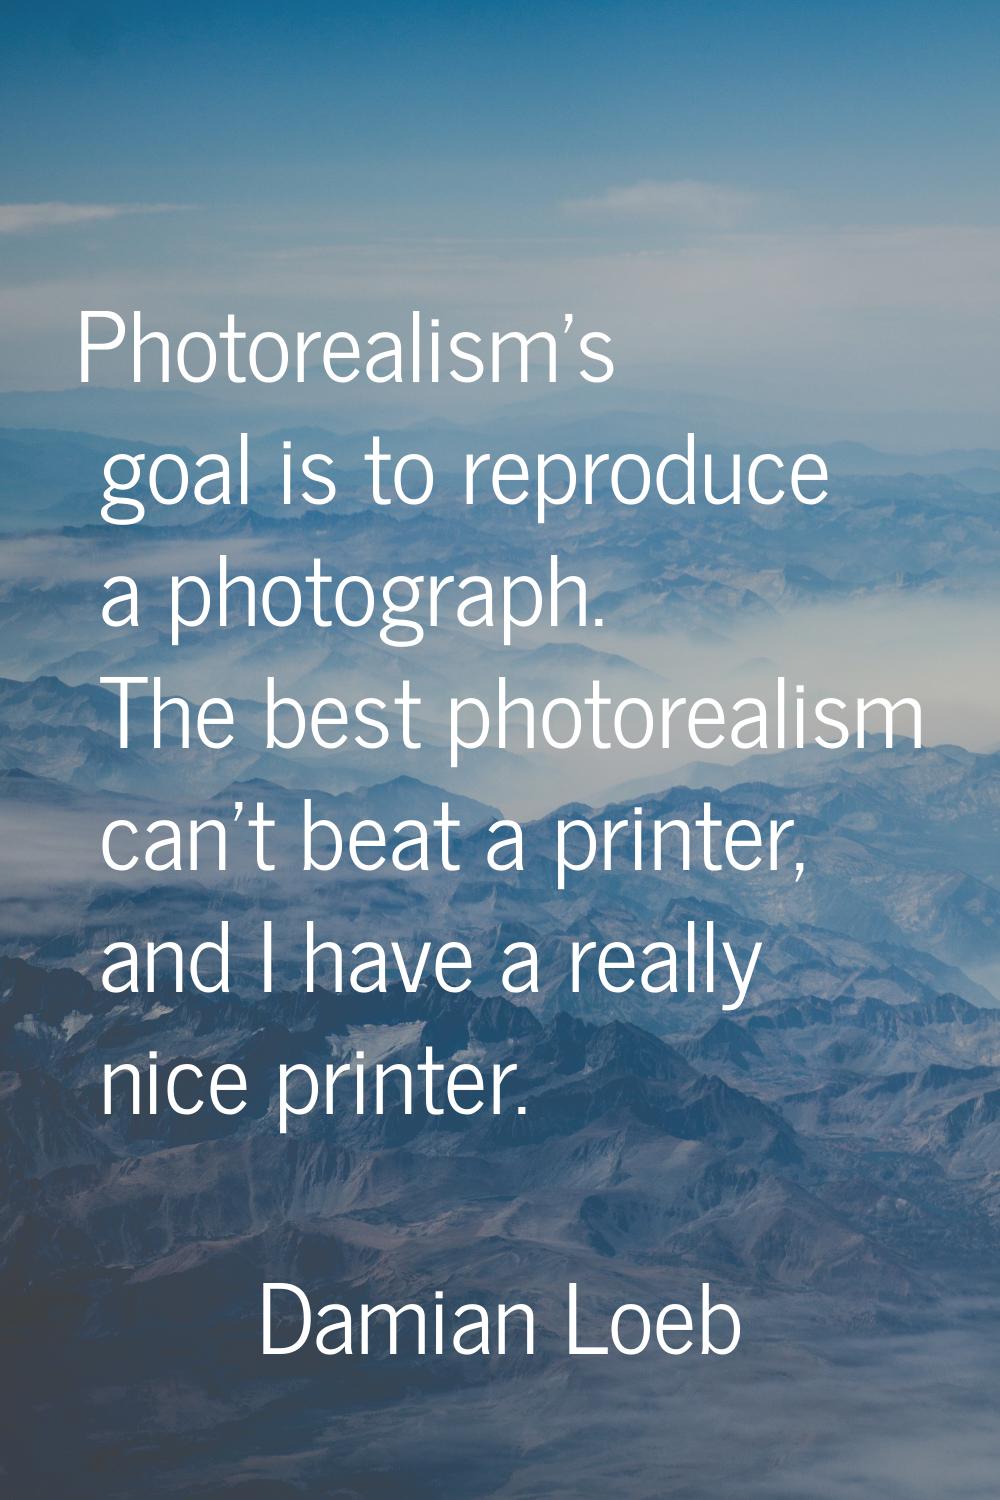 Photorealism's goal is to reproduce a photograph. The best photorealism can't beat a printer, and I